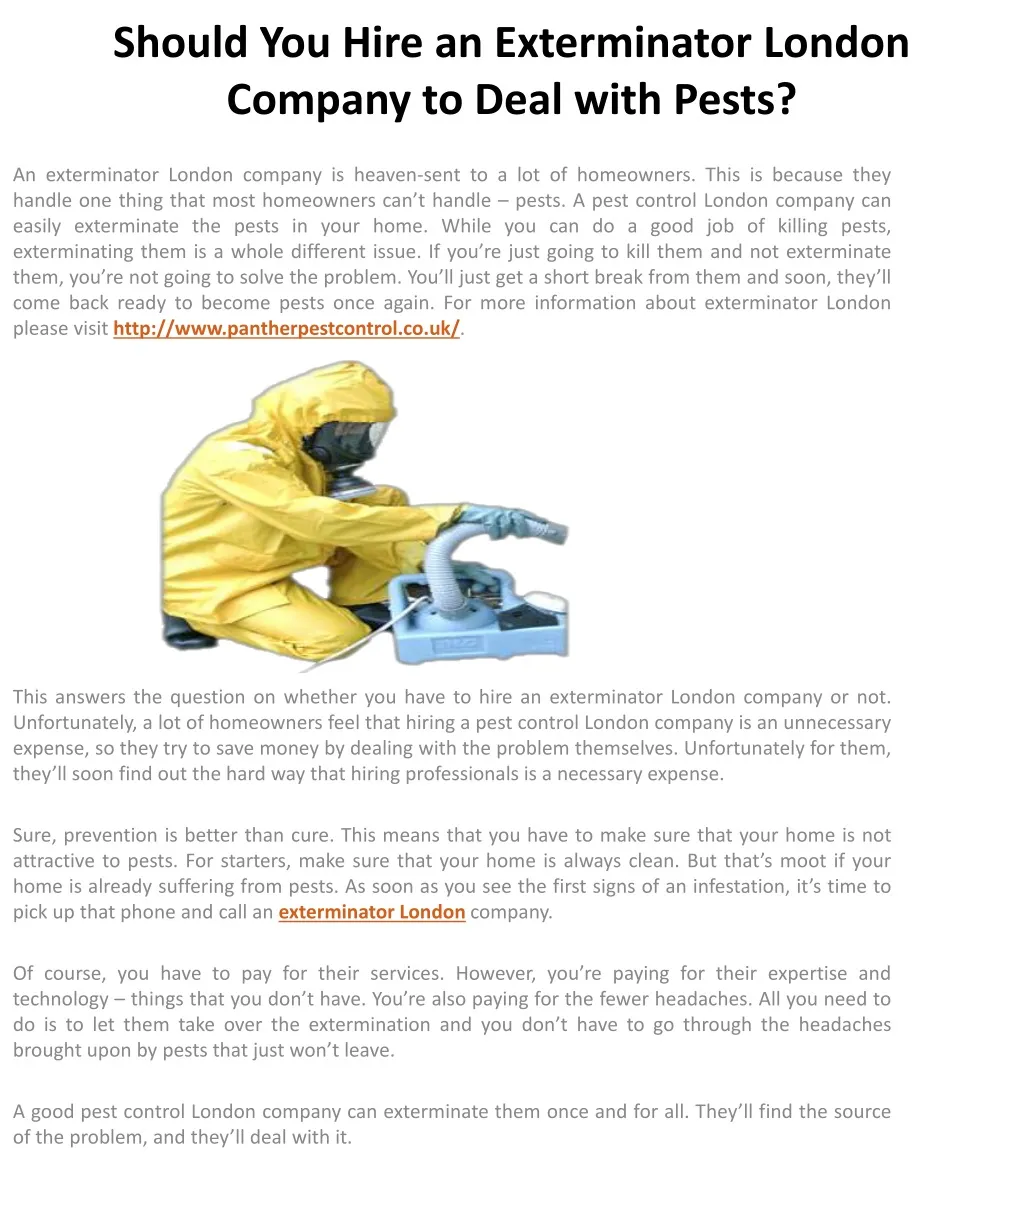 should you hire an exterminator london company to deal with pests